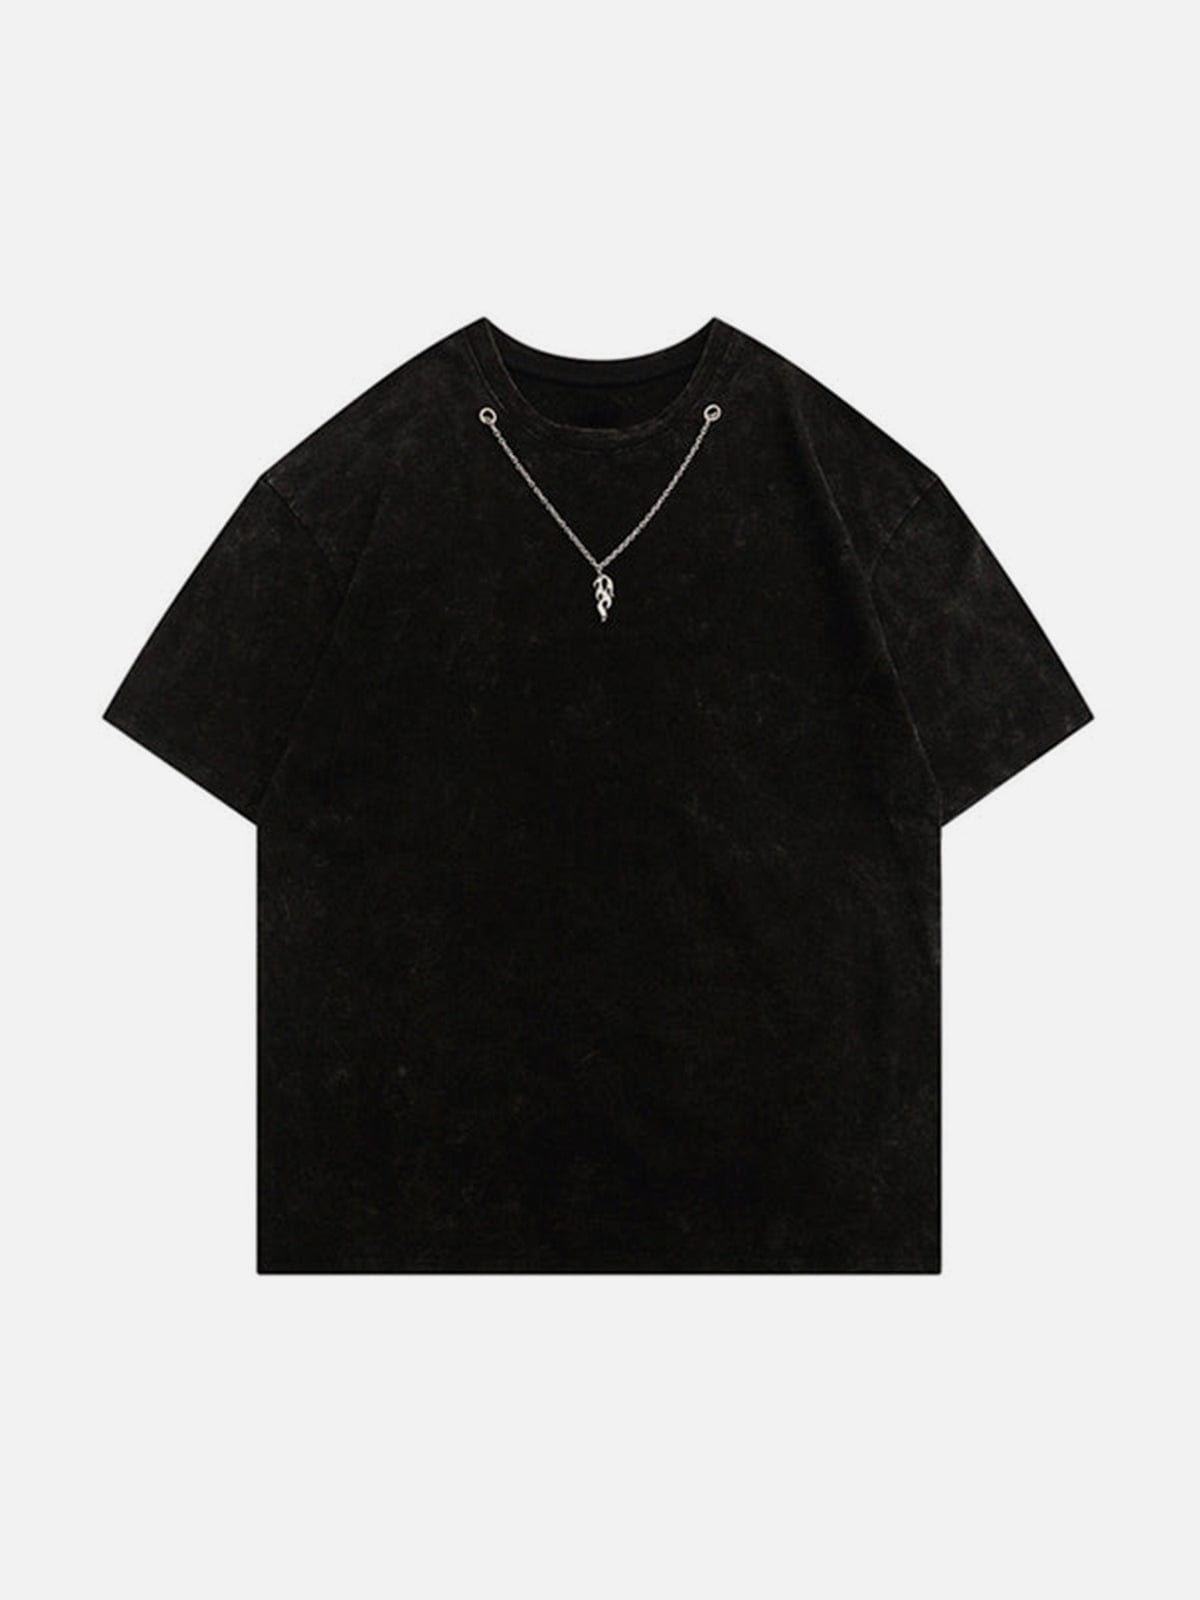 Necklace Washed Tee Streetwear Brand Techwear Combat Tactical YUGEN THEORY